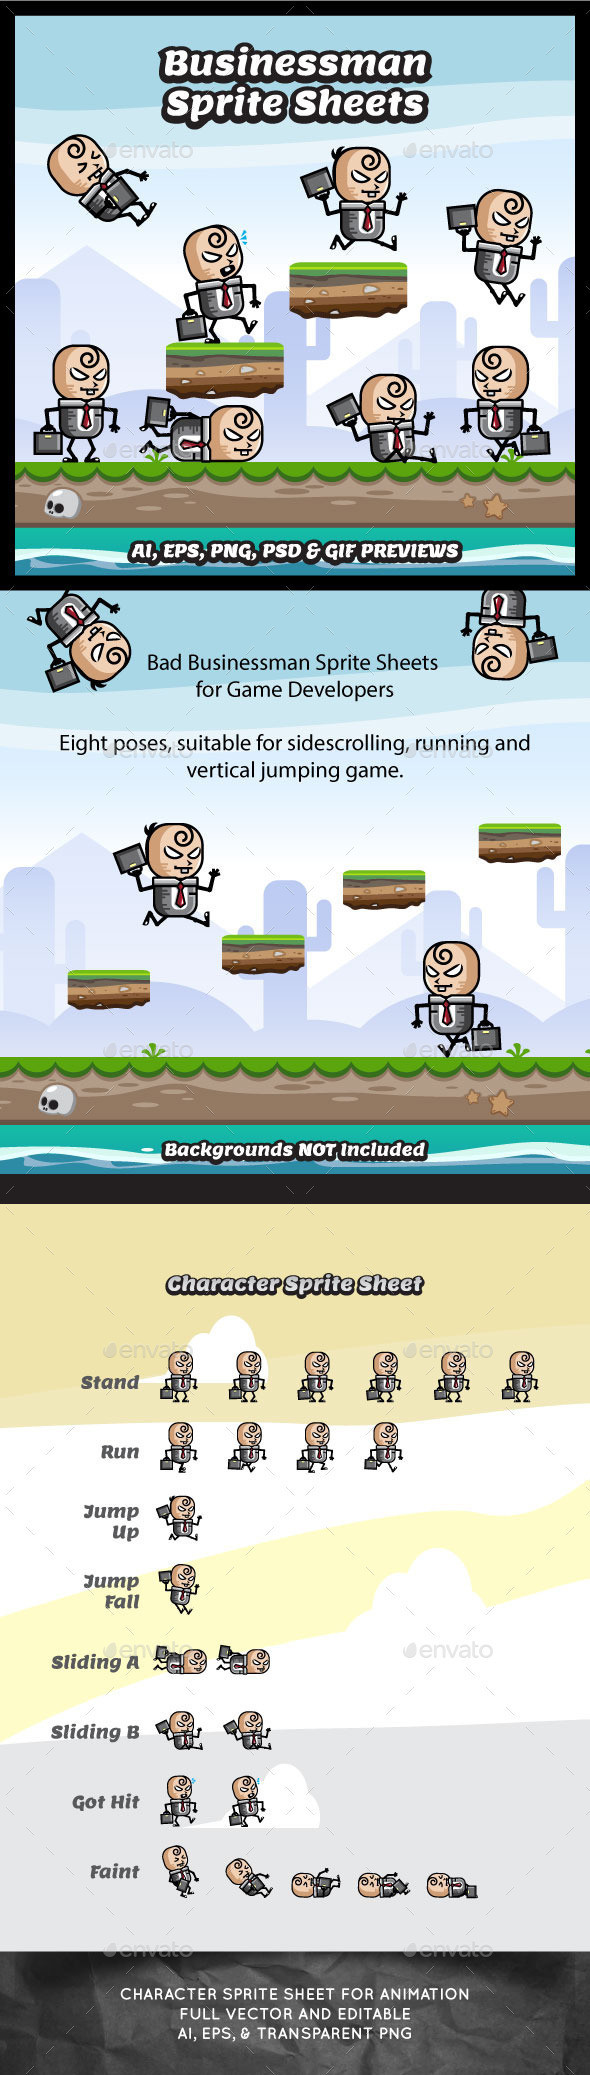 Bad running and jumping businessman game character sprite sheet sidescroller game asset mobile games gameart game art 590